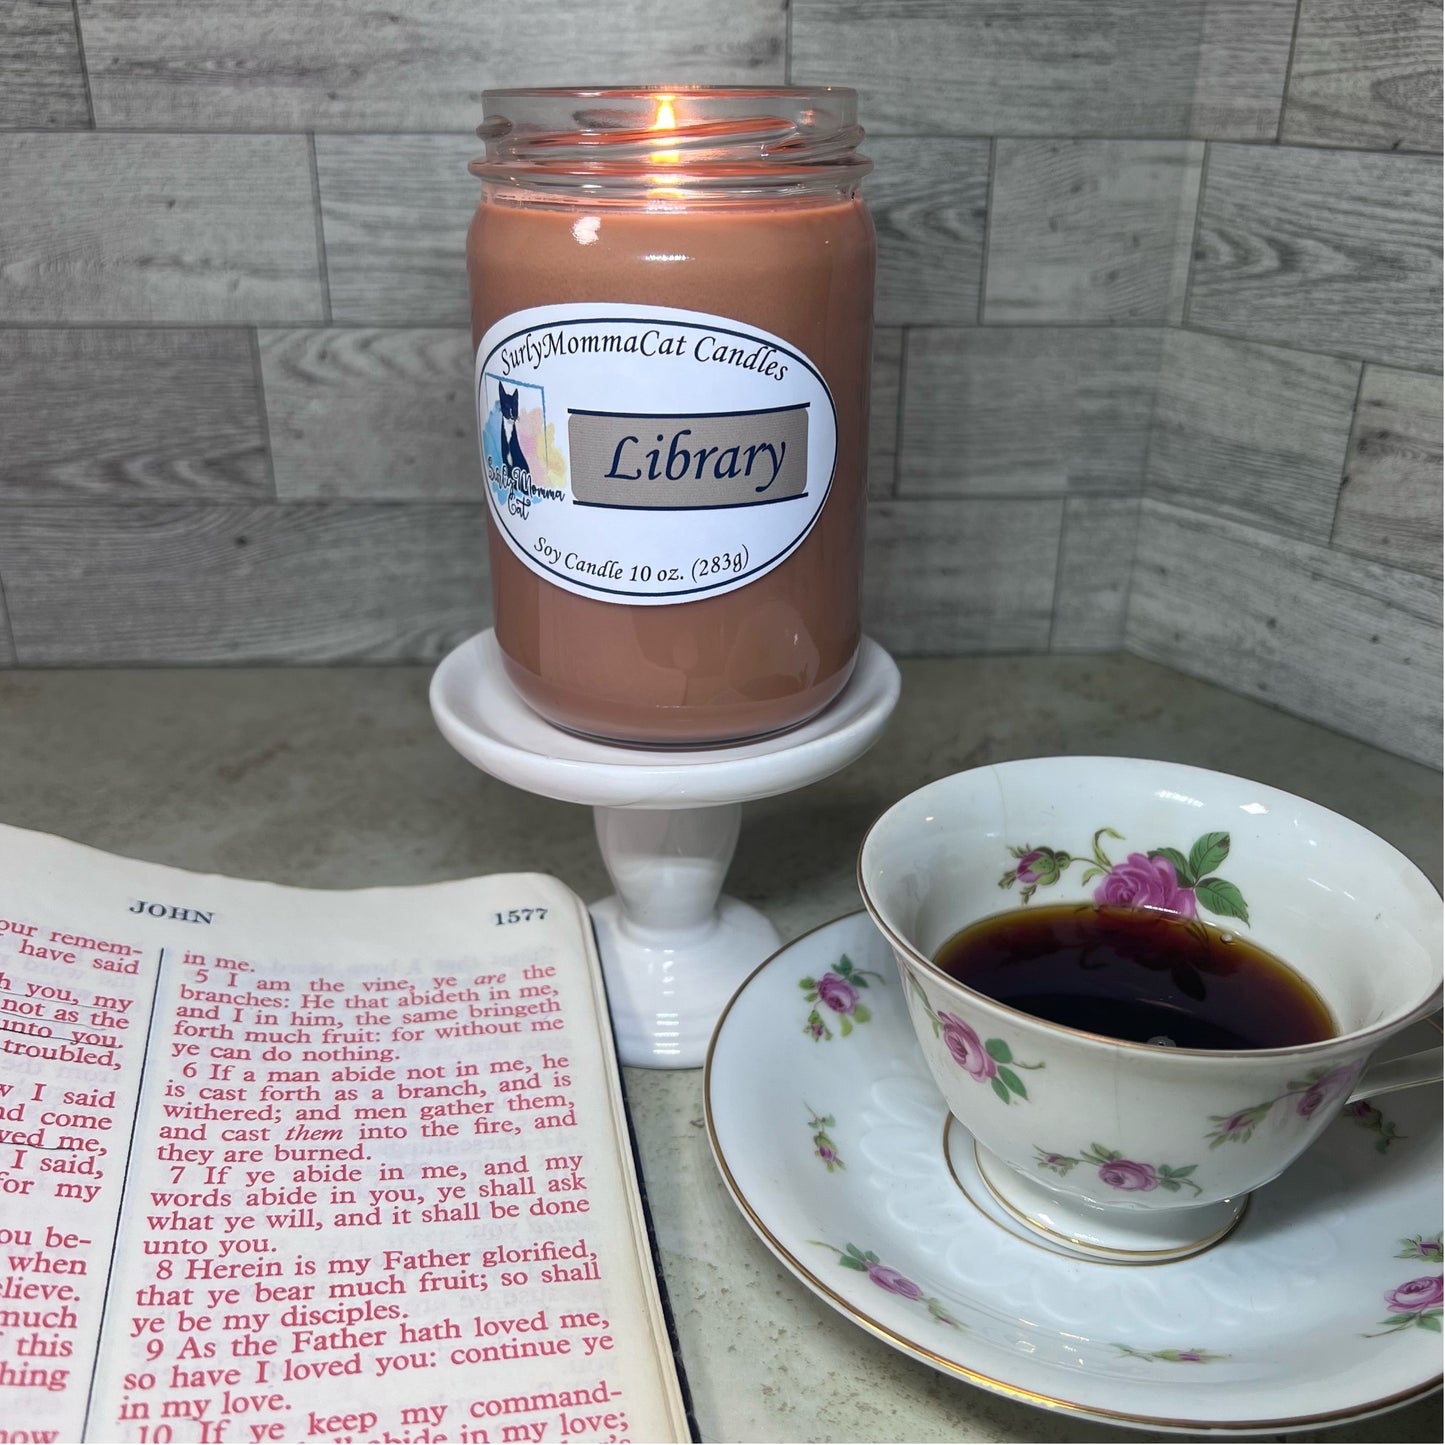 Brown Library soy glass jar candle lit on a white pedestal, and the Holy Bible open to the book of John, with a flowery patterned tea cup and saucer..